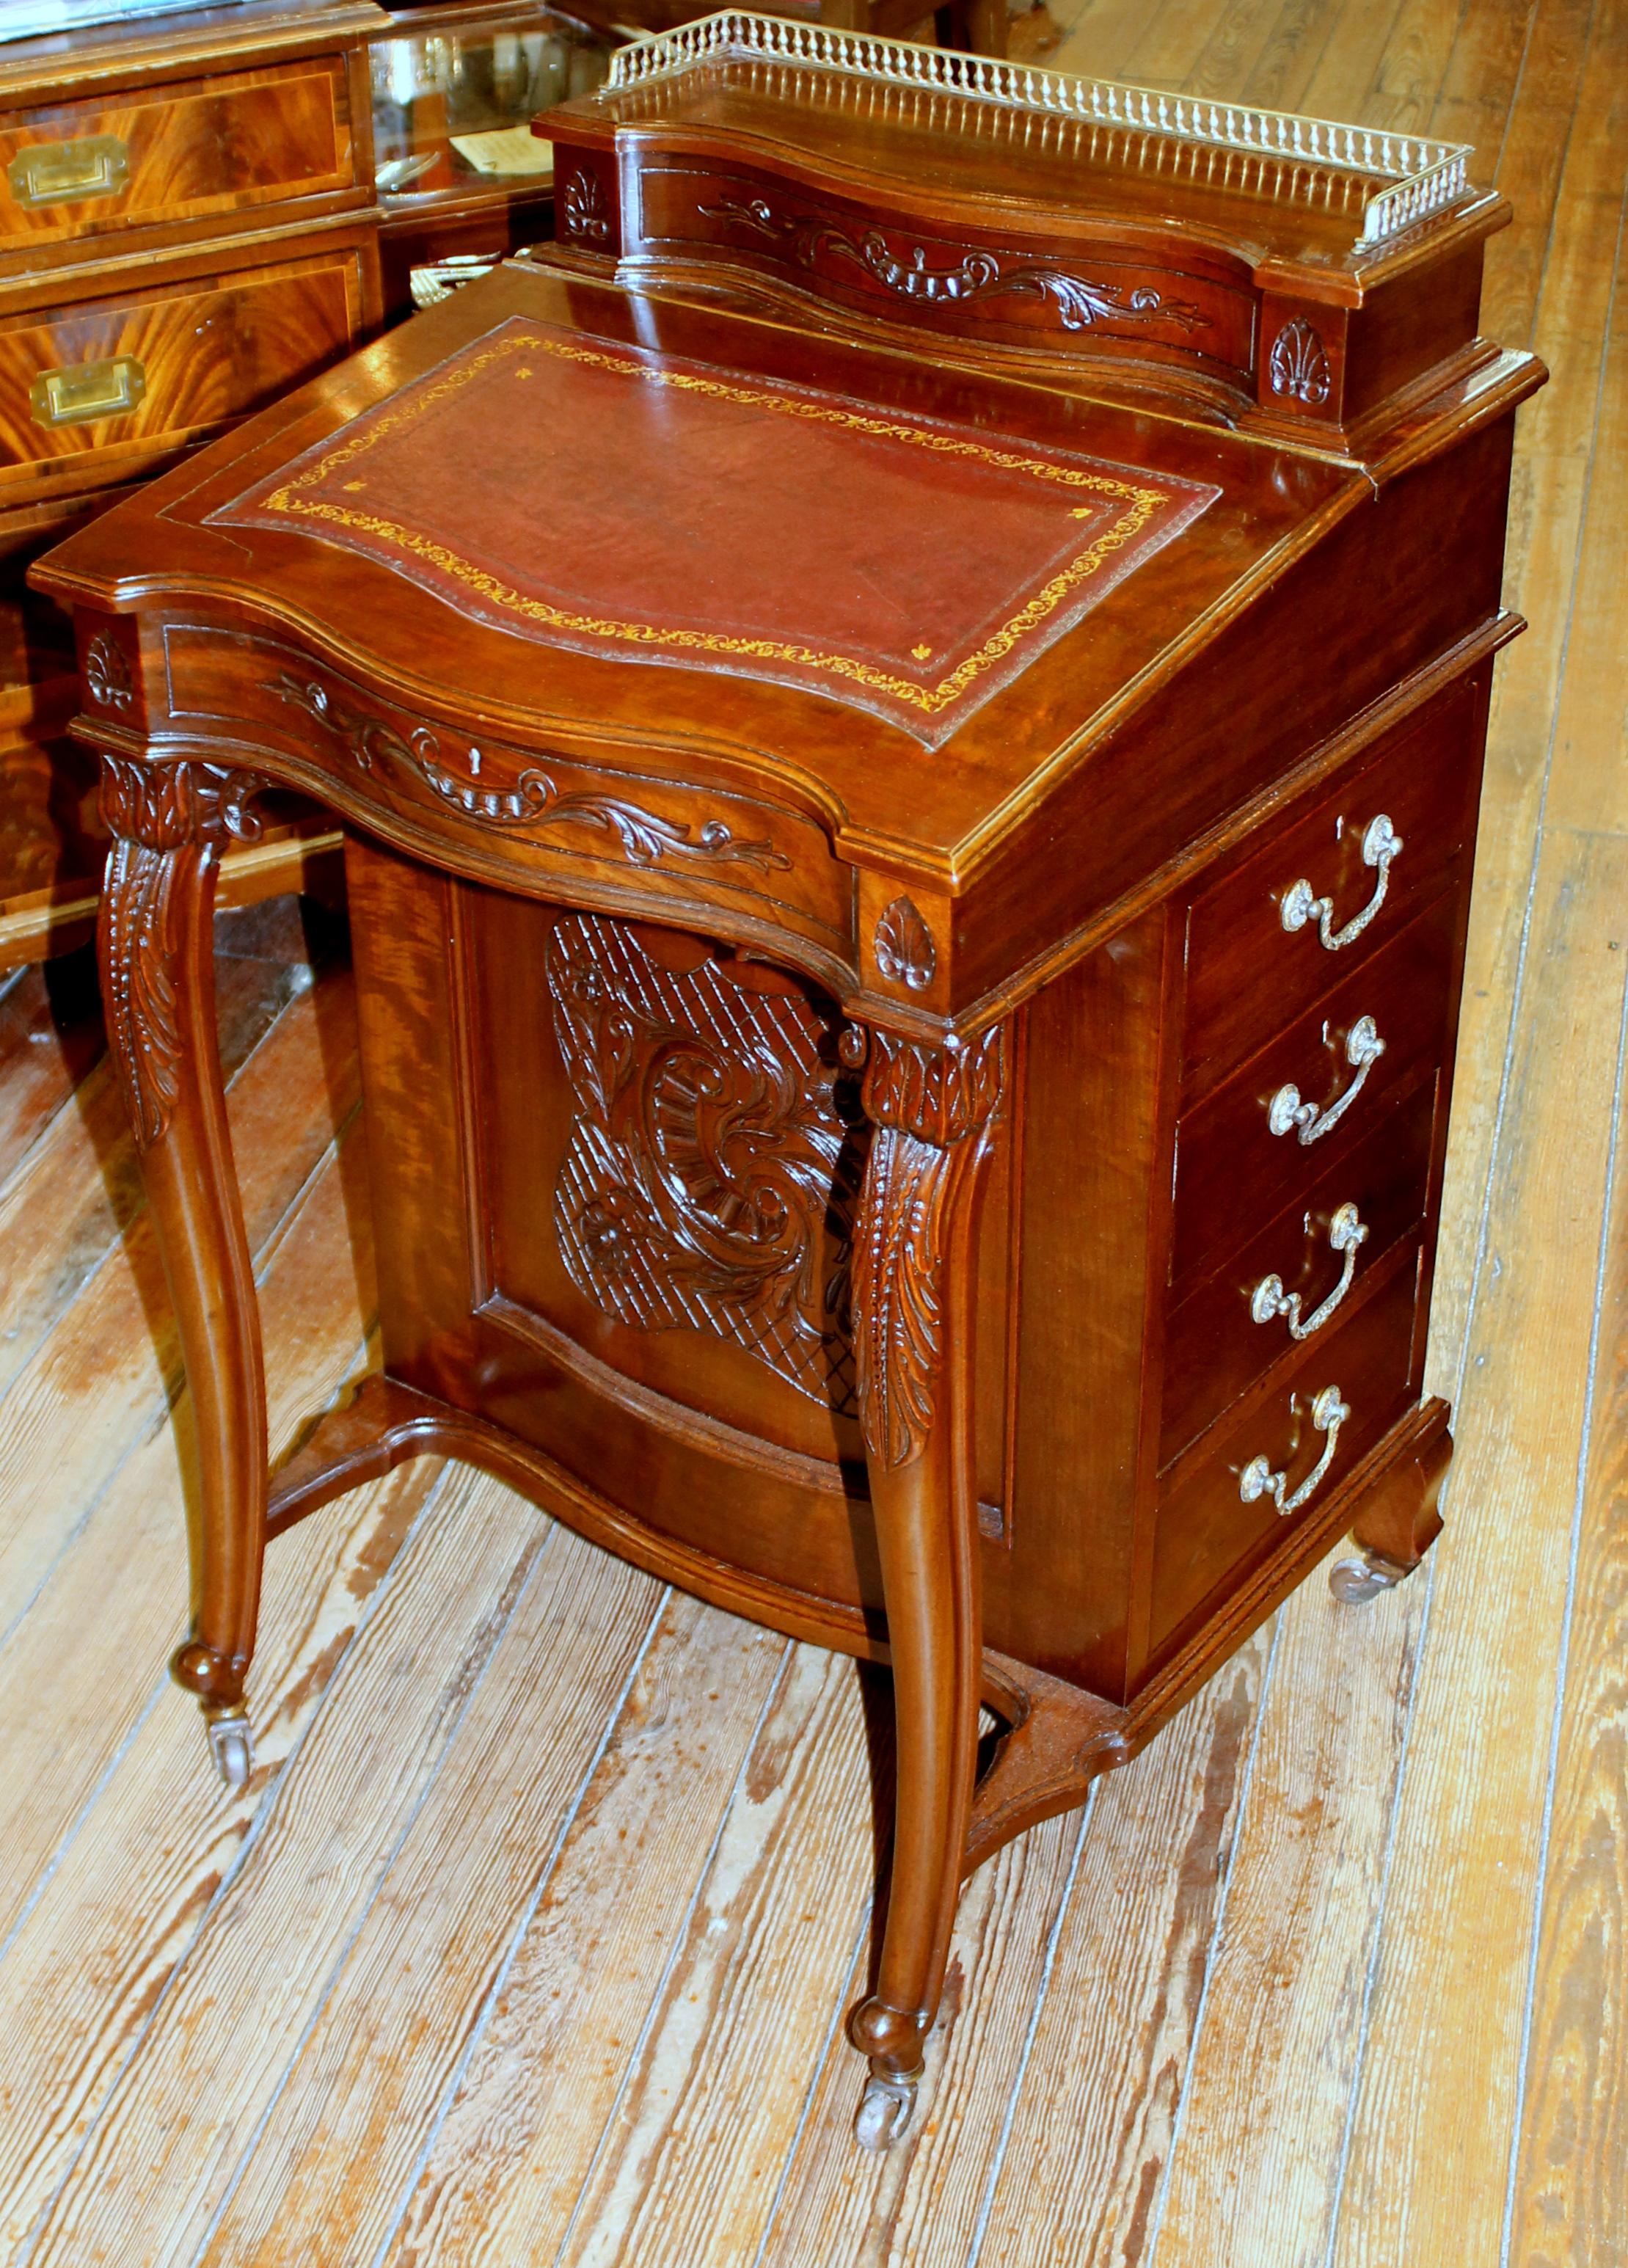 Fabulous quality antique 19th century English carved mahogany Davenport or Ship Captain's desk with tooled and gilt leather lid

Please note the exceptionally hand carved mahogany details throughout including the central carved waist. Bank of